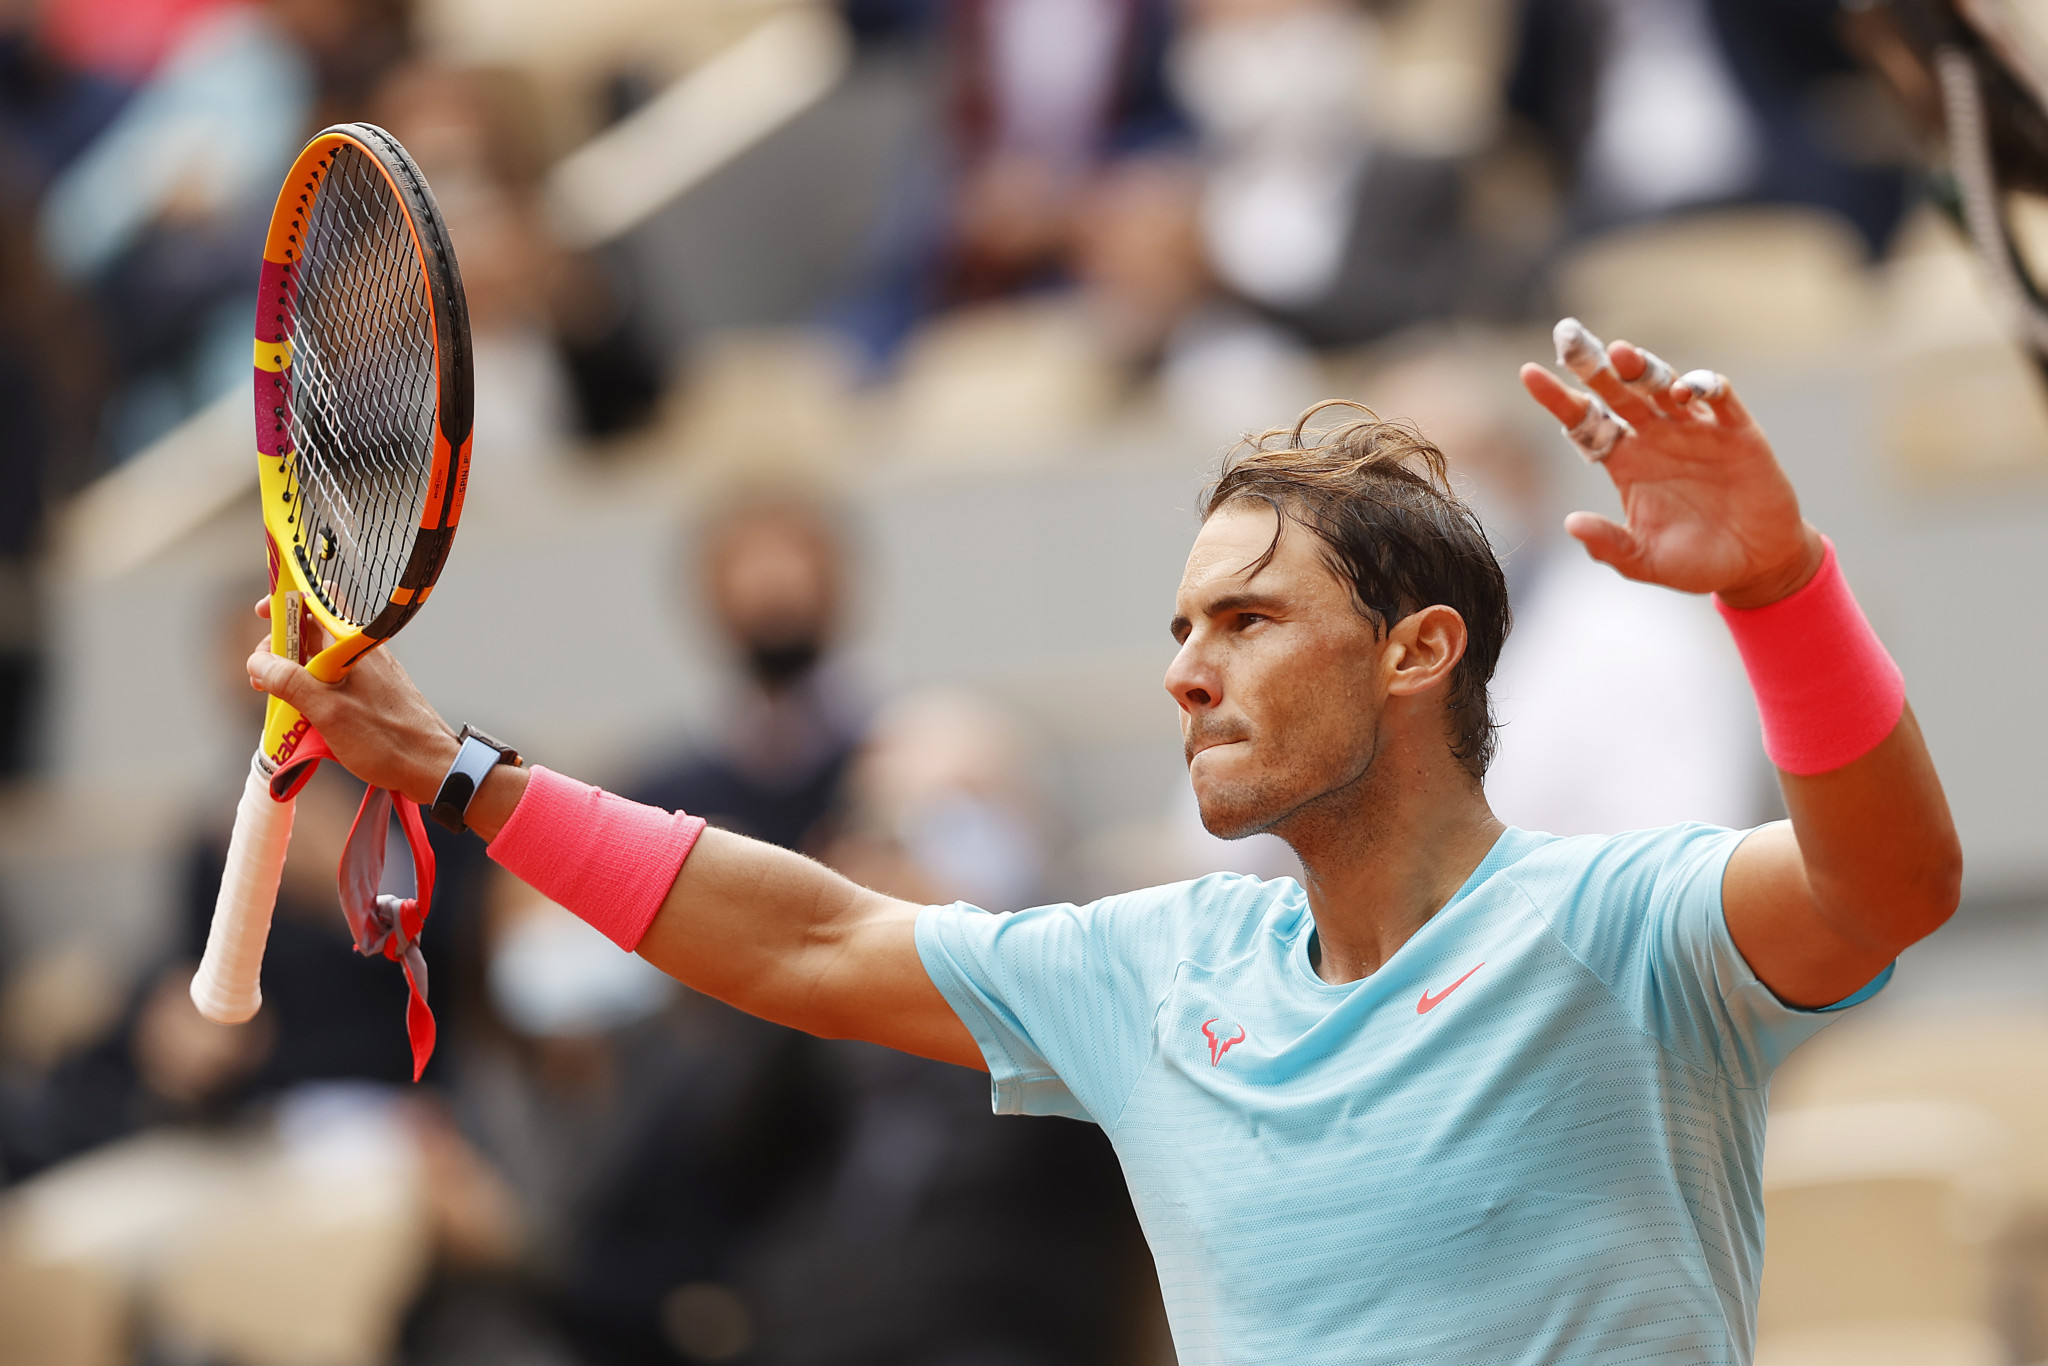 Rafael Nadal, who is aiming to win the French Open for the 13th time, won through to round three in straight sets today ©Getty Images